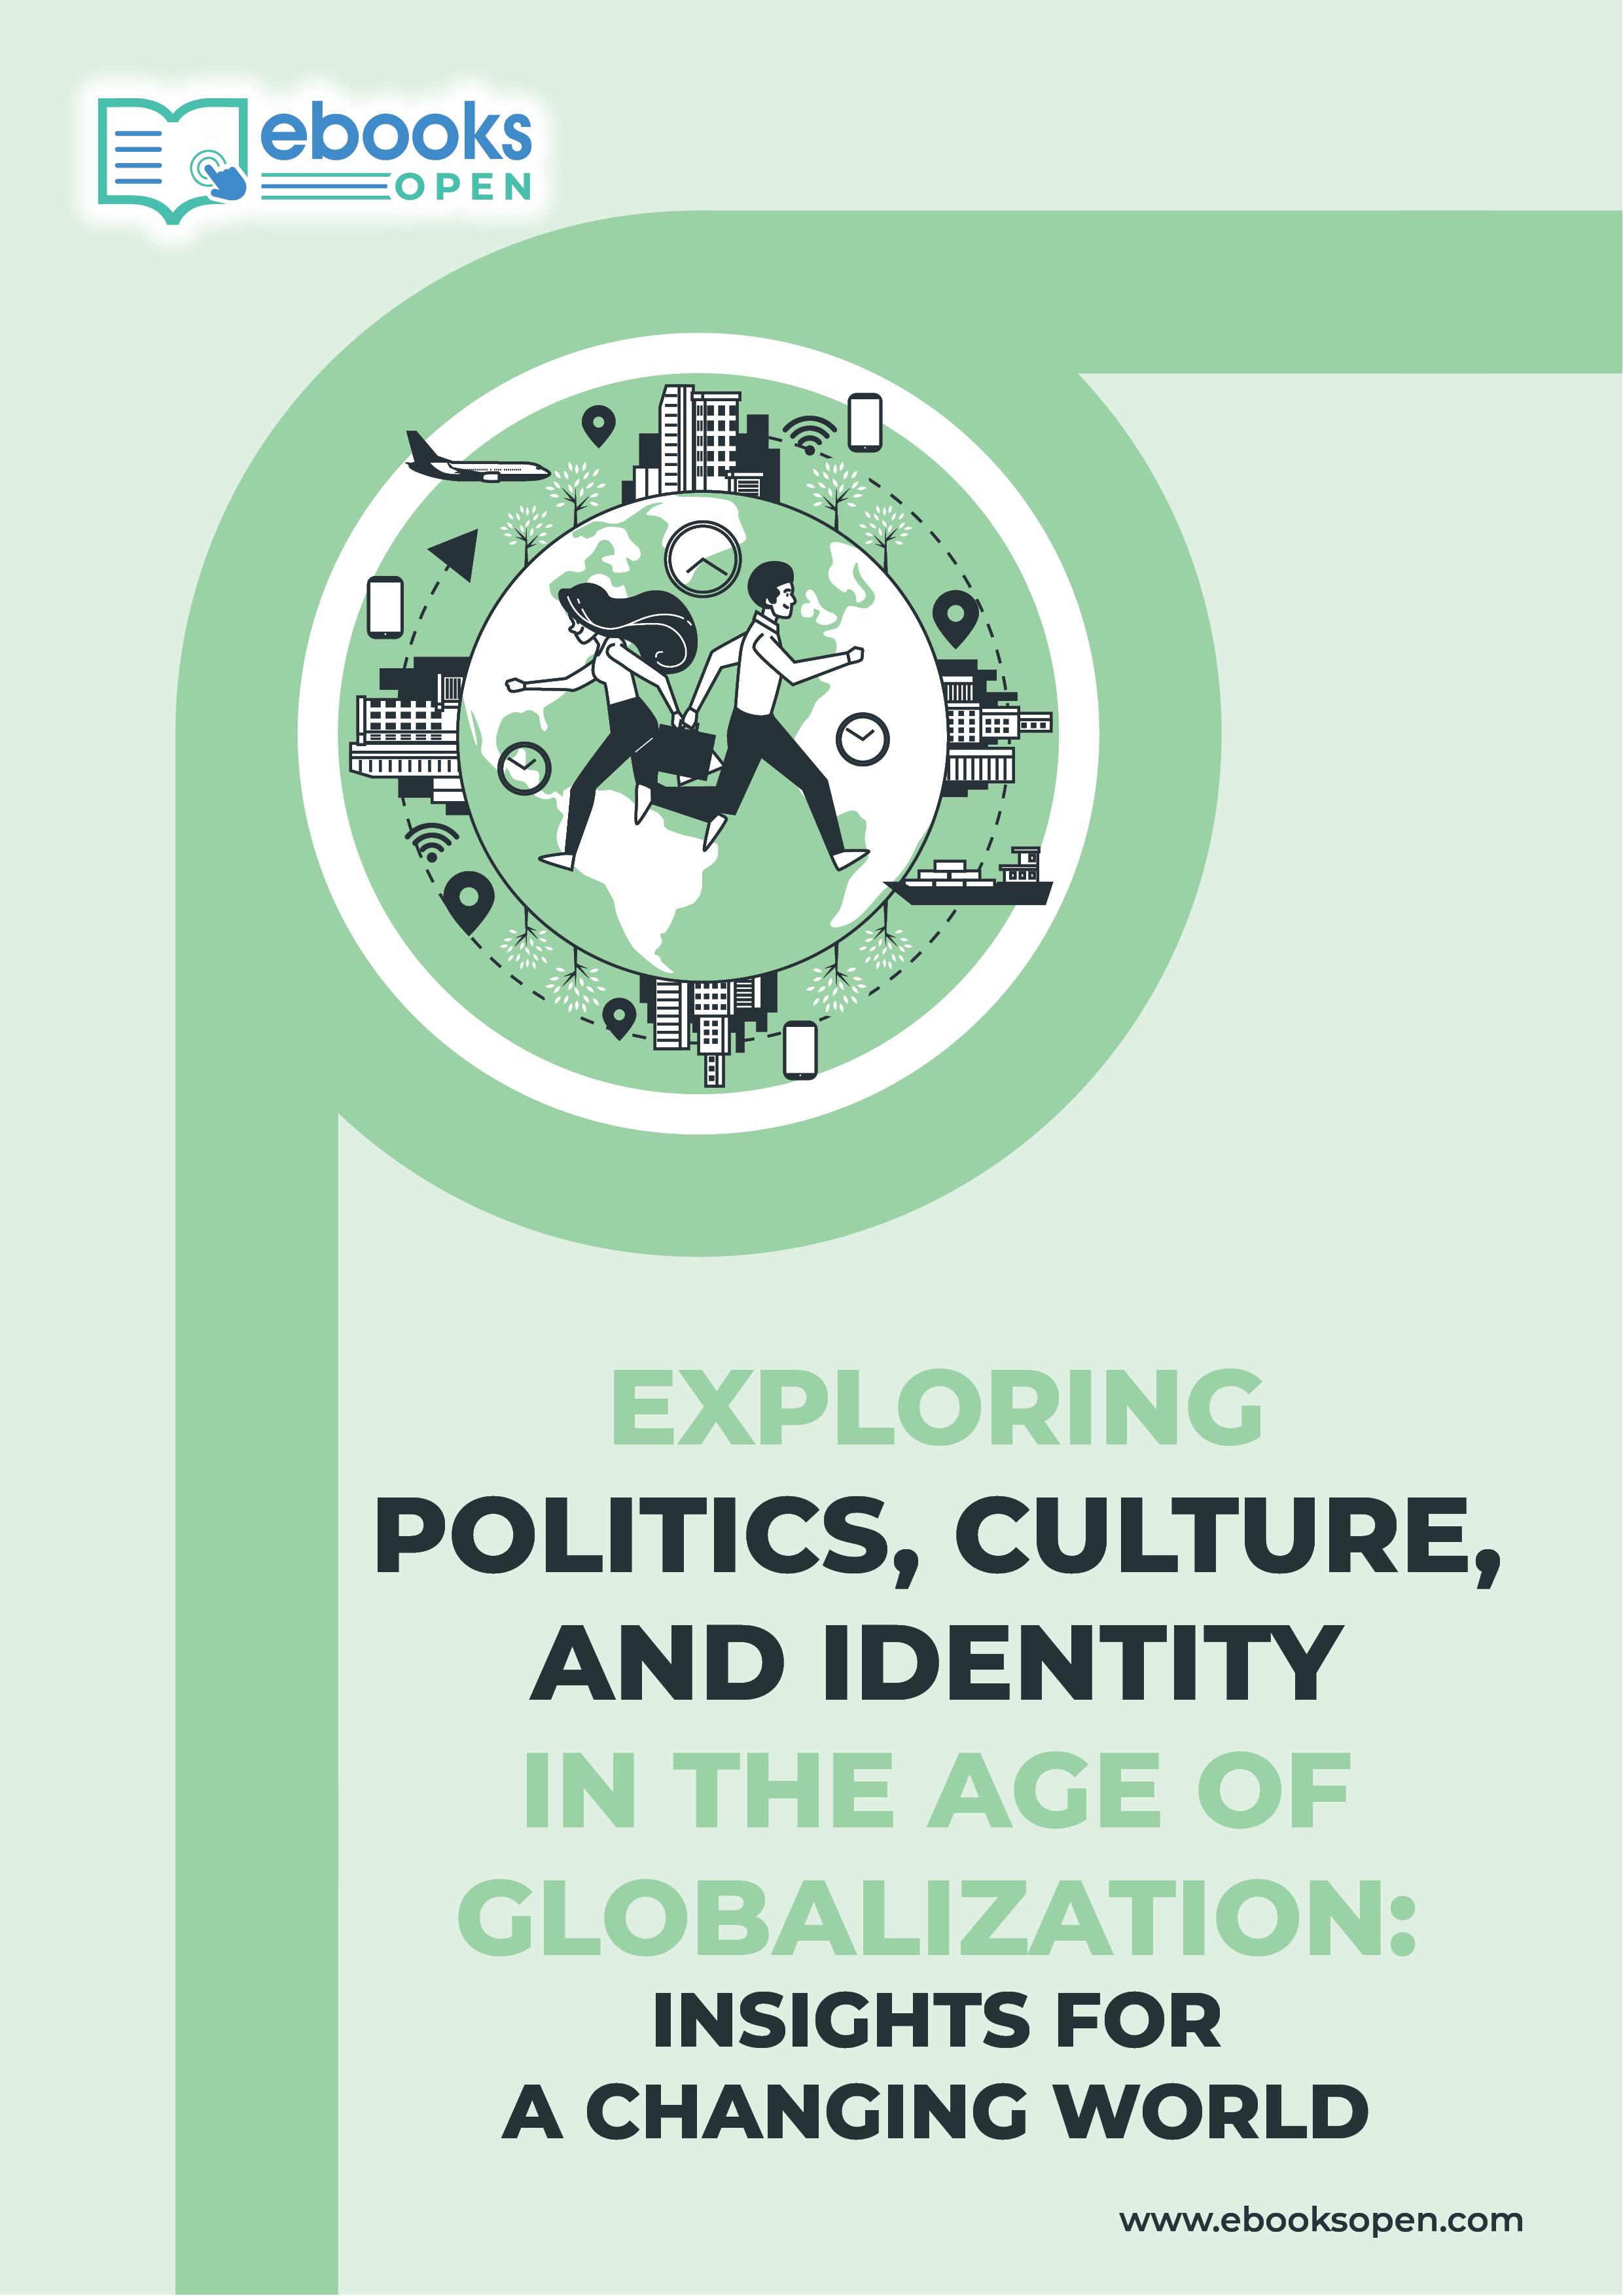 Exploring Politics, Culture, and Identity in the Age of Globalization: Insights for a Changing World